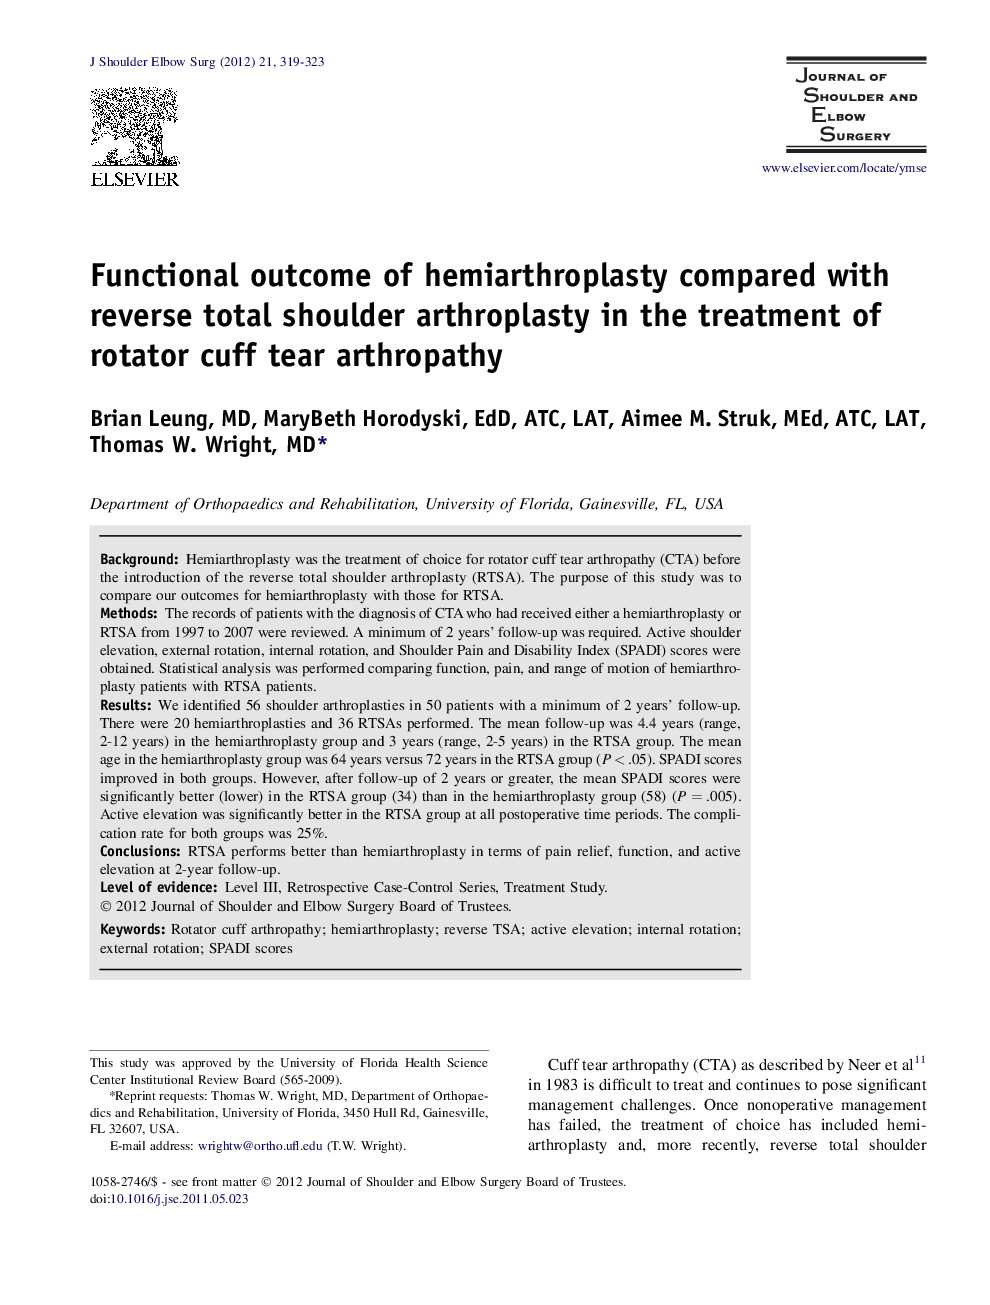 Functional outcome of hemiarthroplasty compared with reverse total shoulder arthroplasty in the treatment of rotator cuff tear arthropathy 